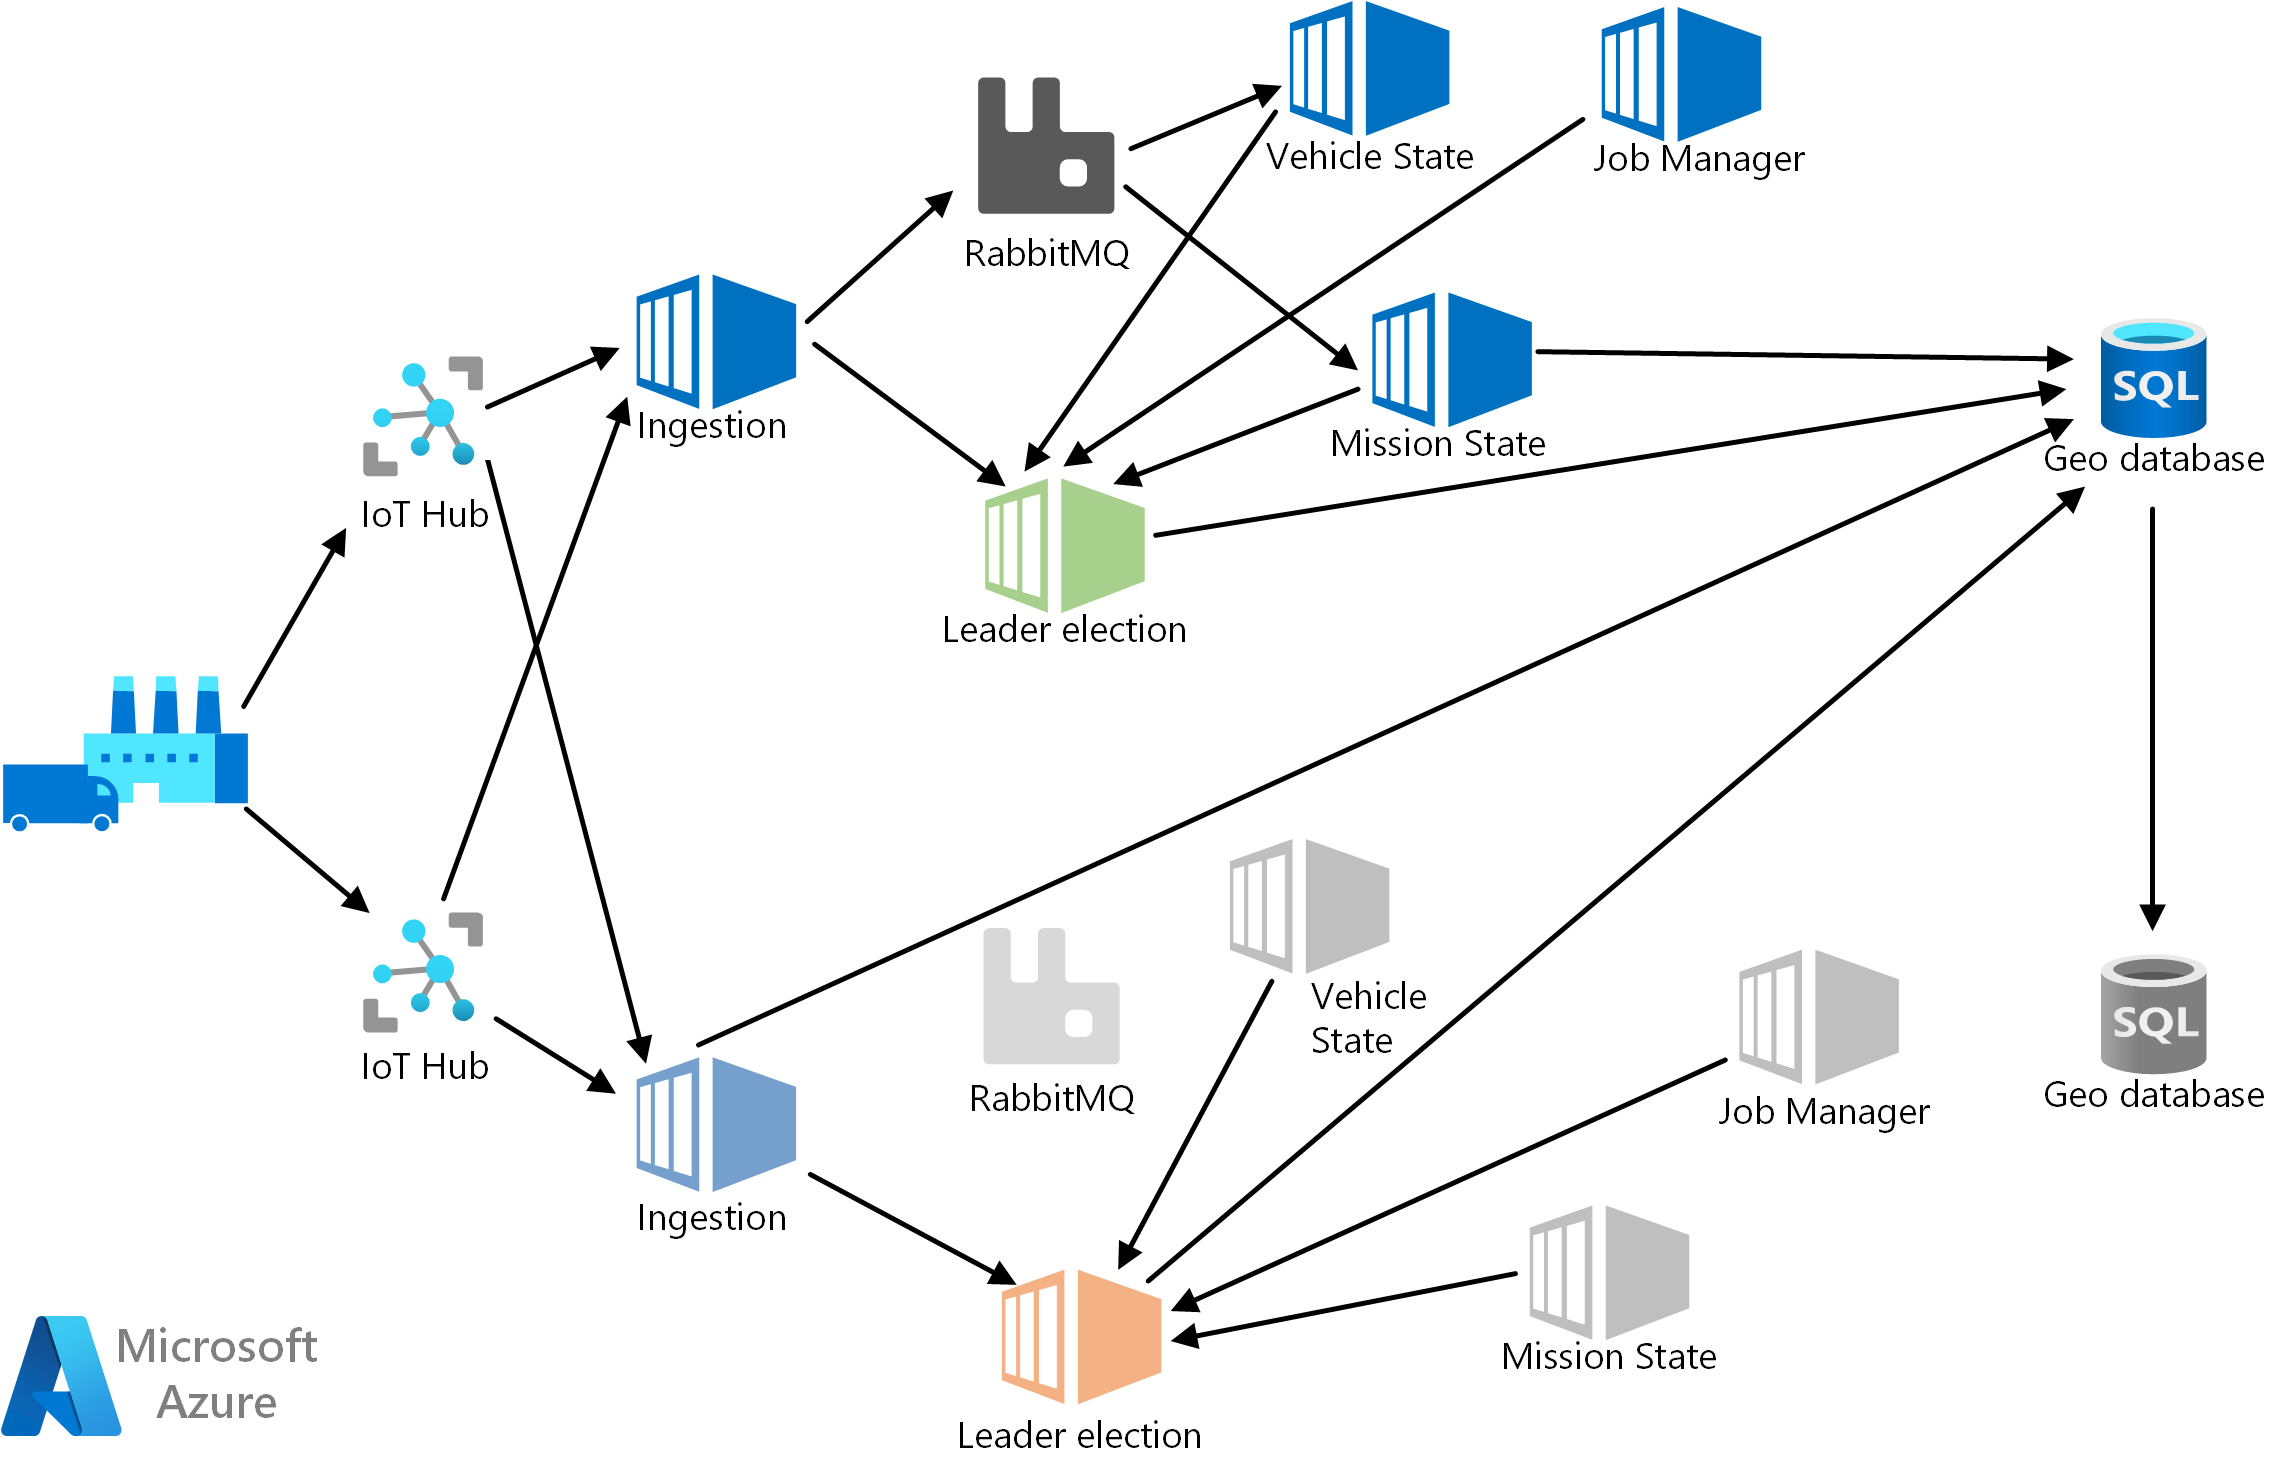 Screenshot of an instance of the back end, consisting of the following components, is deployed to two Azure regions: Azure IoT Hub, Ingestion, RabbitMQ, Mission State, Vehicle State, Job Manager, and Geo DB.